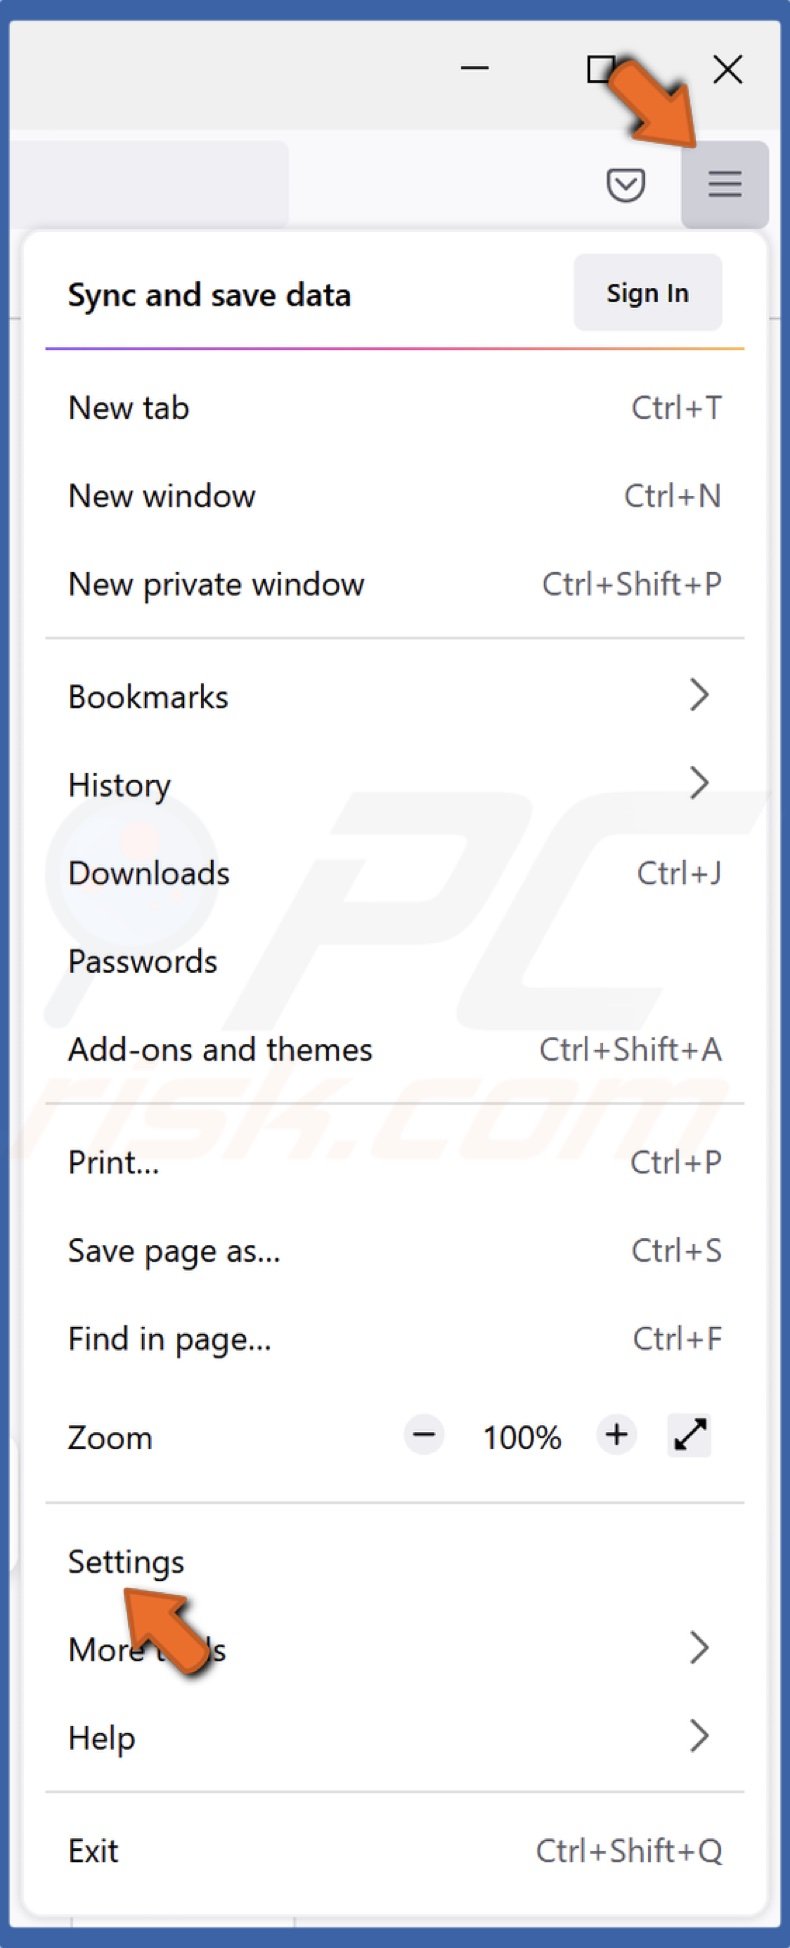 Open the menu and click Settings